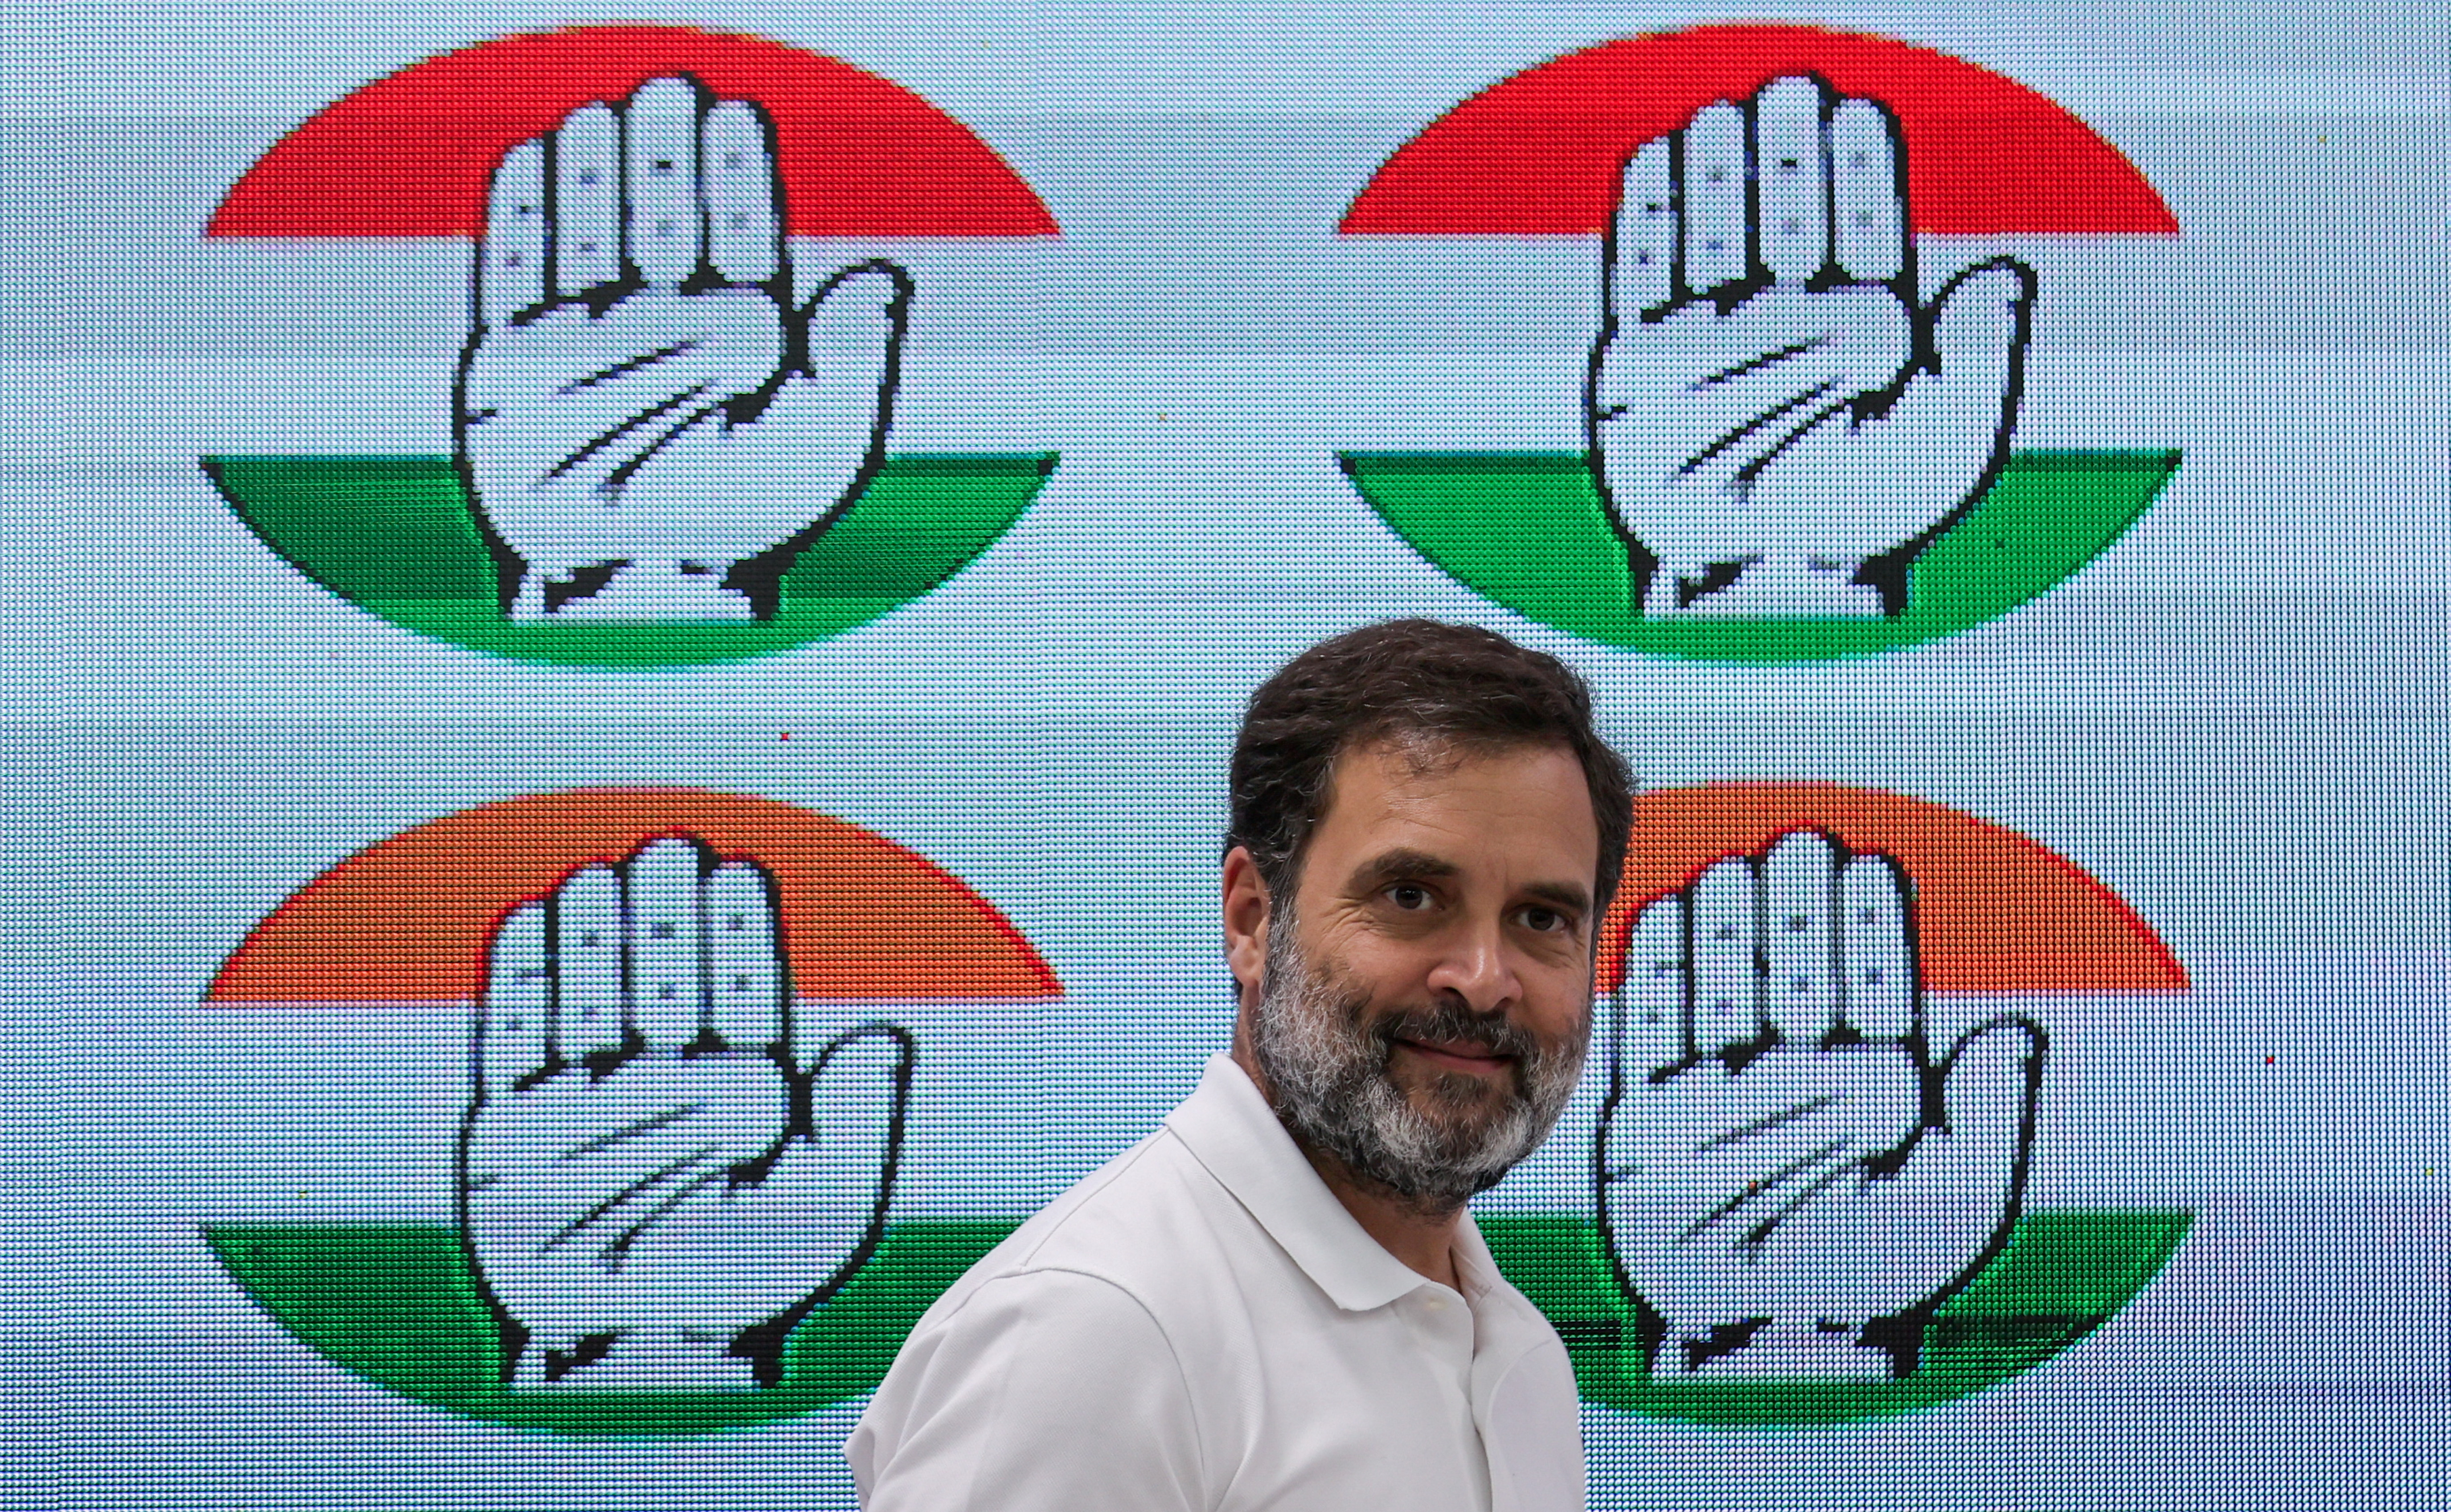 Rahul Gandhi, a senior leader of India's main opposition Congress party, arrives to address the media at Congress' headquarterss in New Delhi